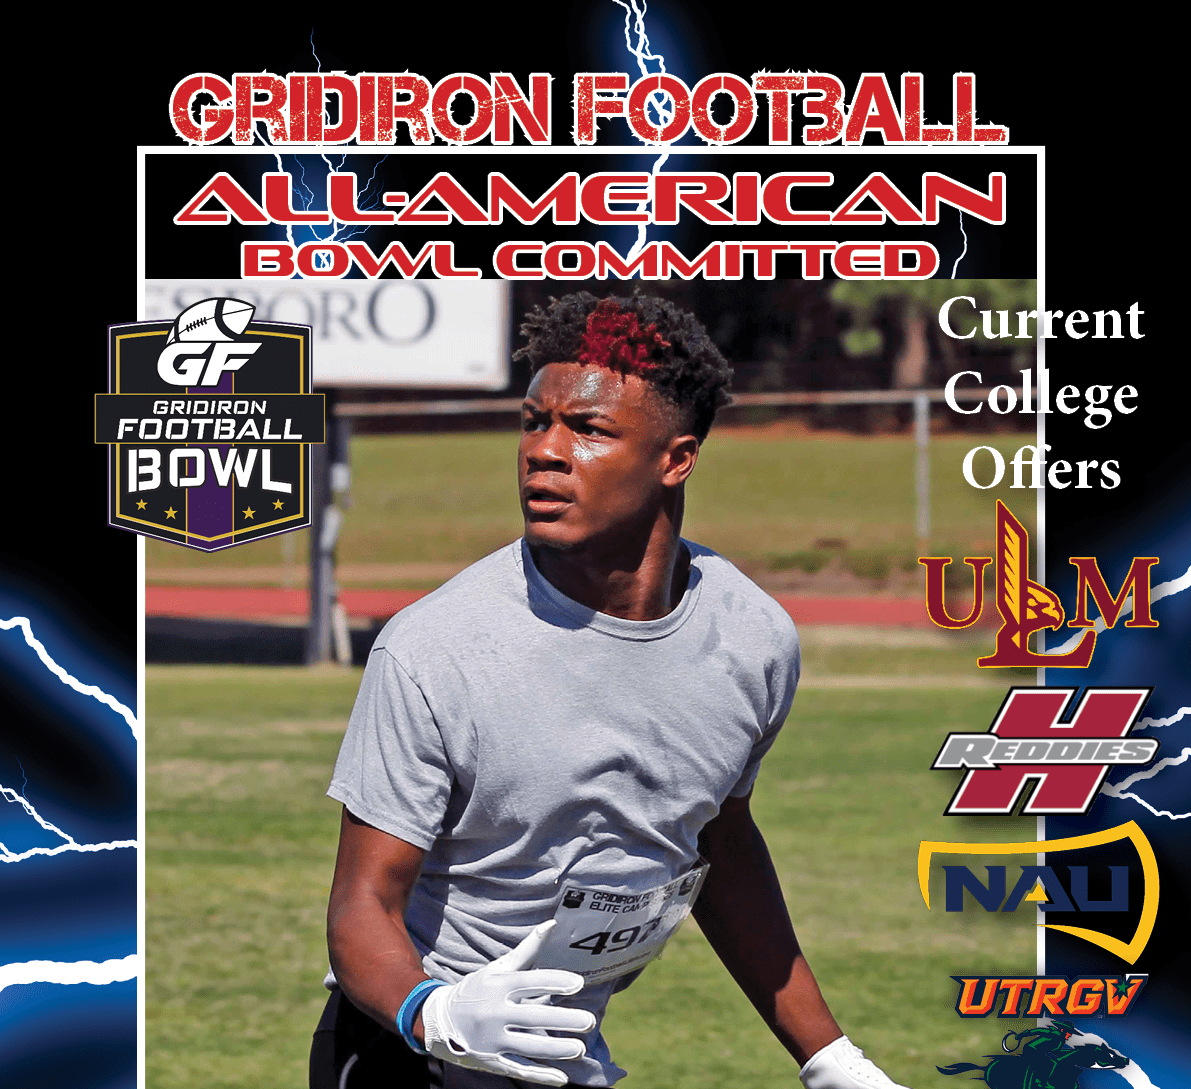 Center RB Kaden Dixon is First Player to Commit to the 2023 Gridiron Football All-American Bowl Game